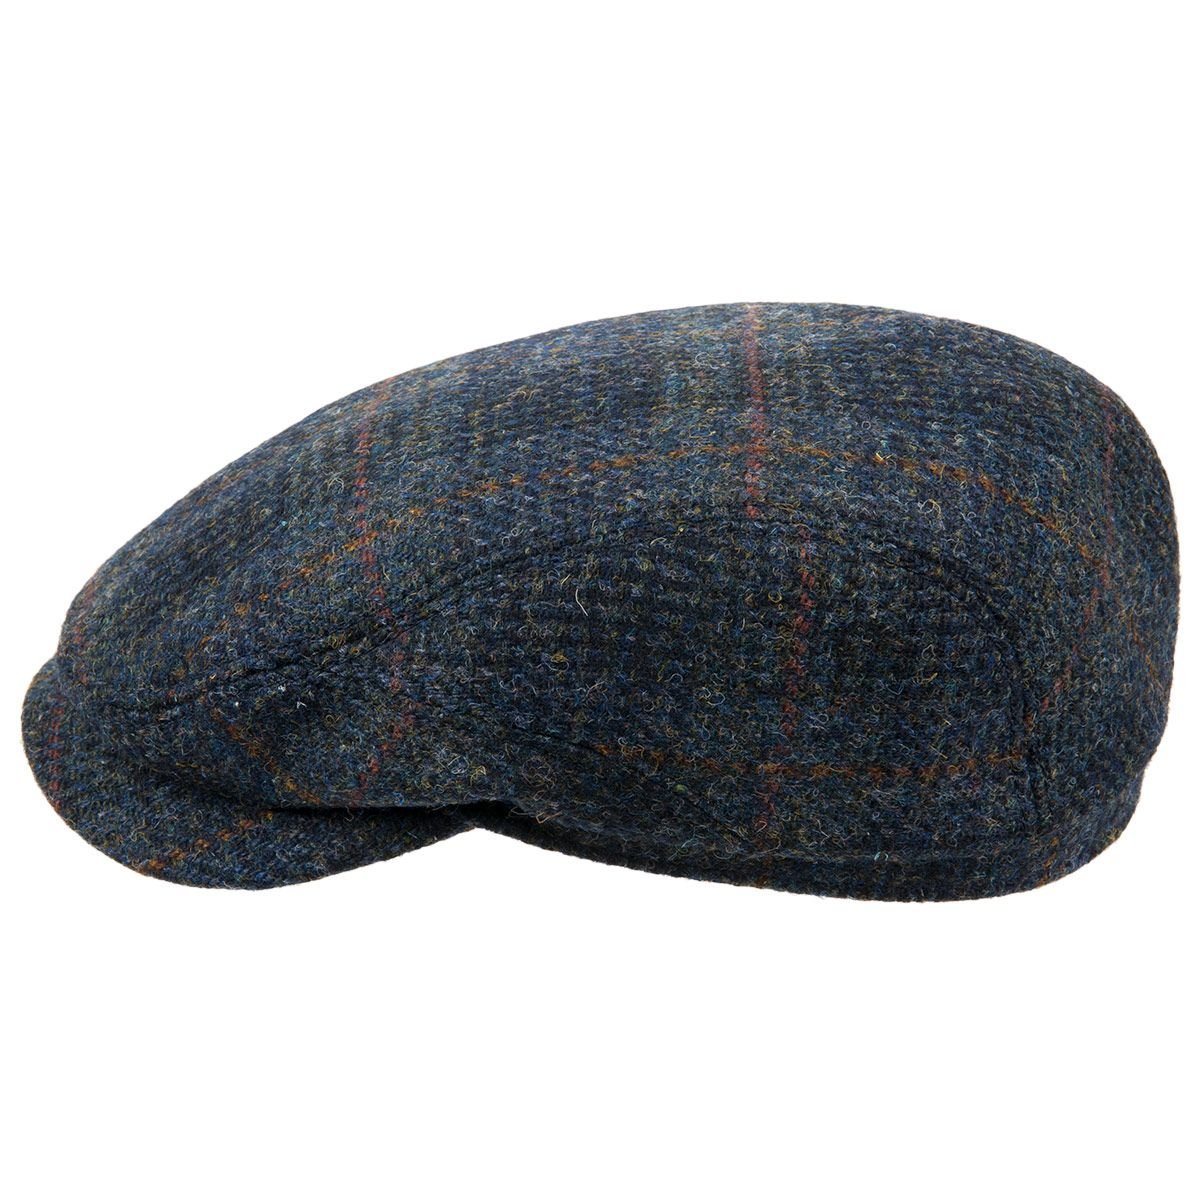 Stetson Harris Tweed Check Flat Cap Men Made in Germany 